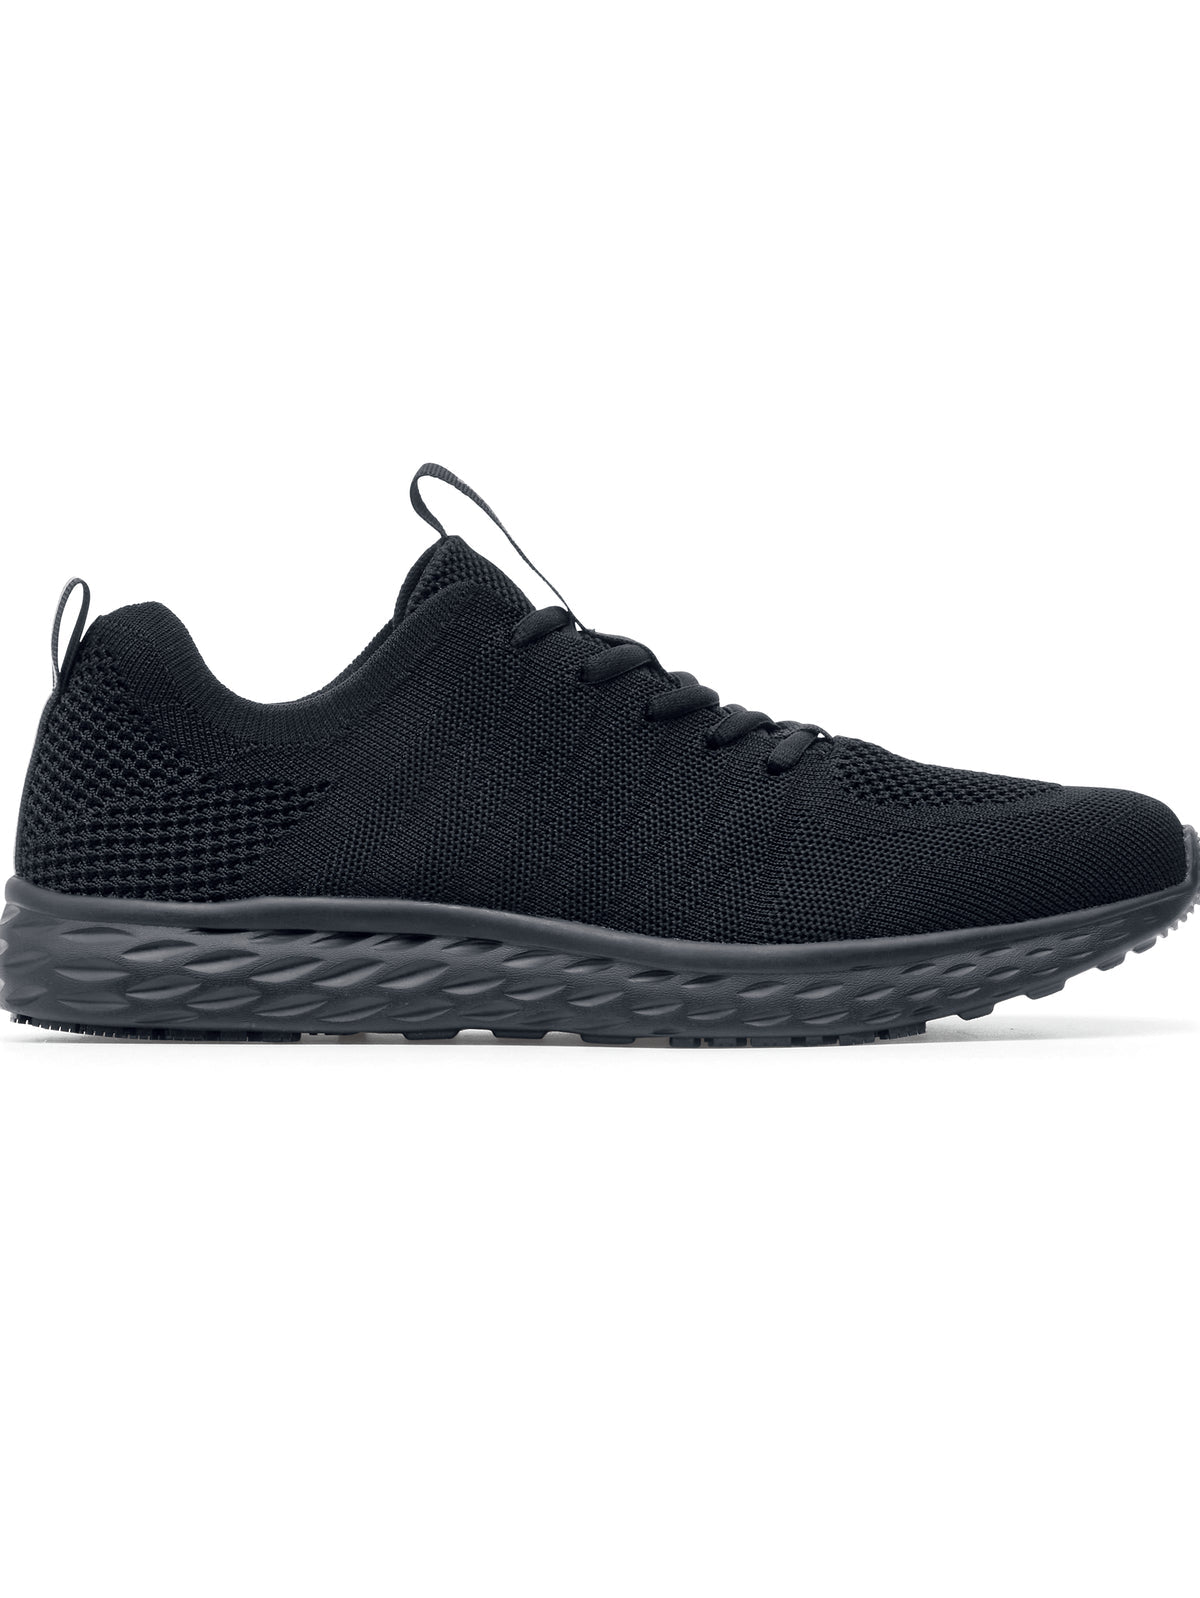 Men's Work Shoe Everlight Black by Shoes For Crews -  ChefsCotton